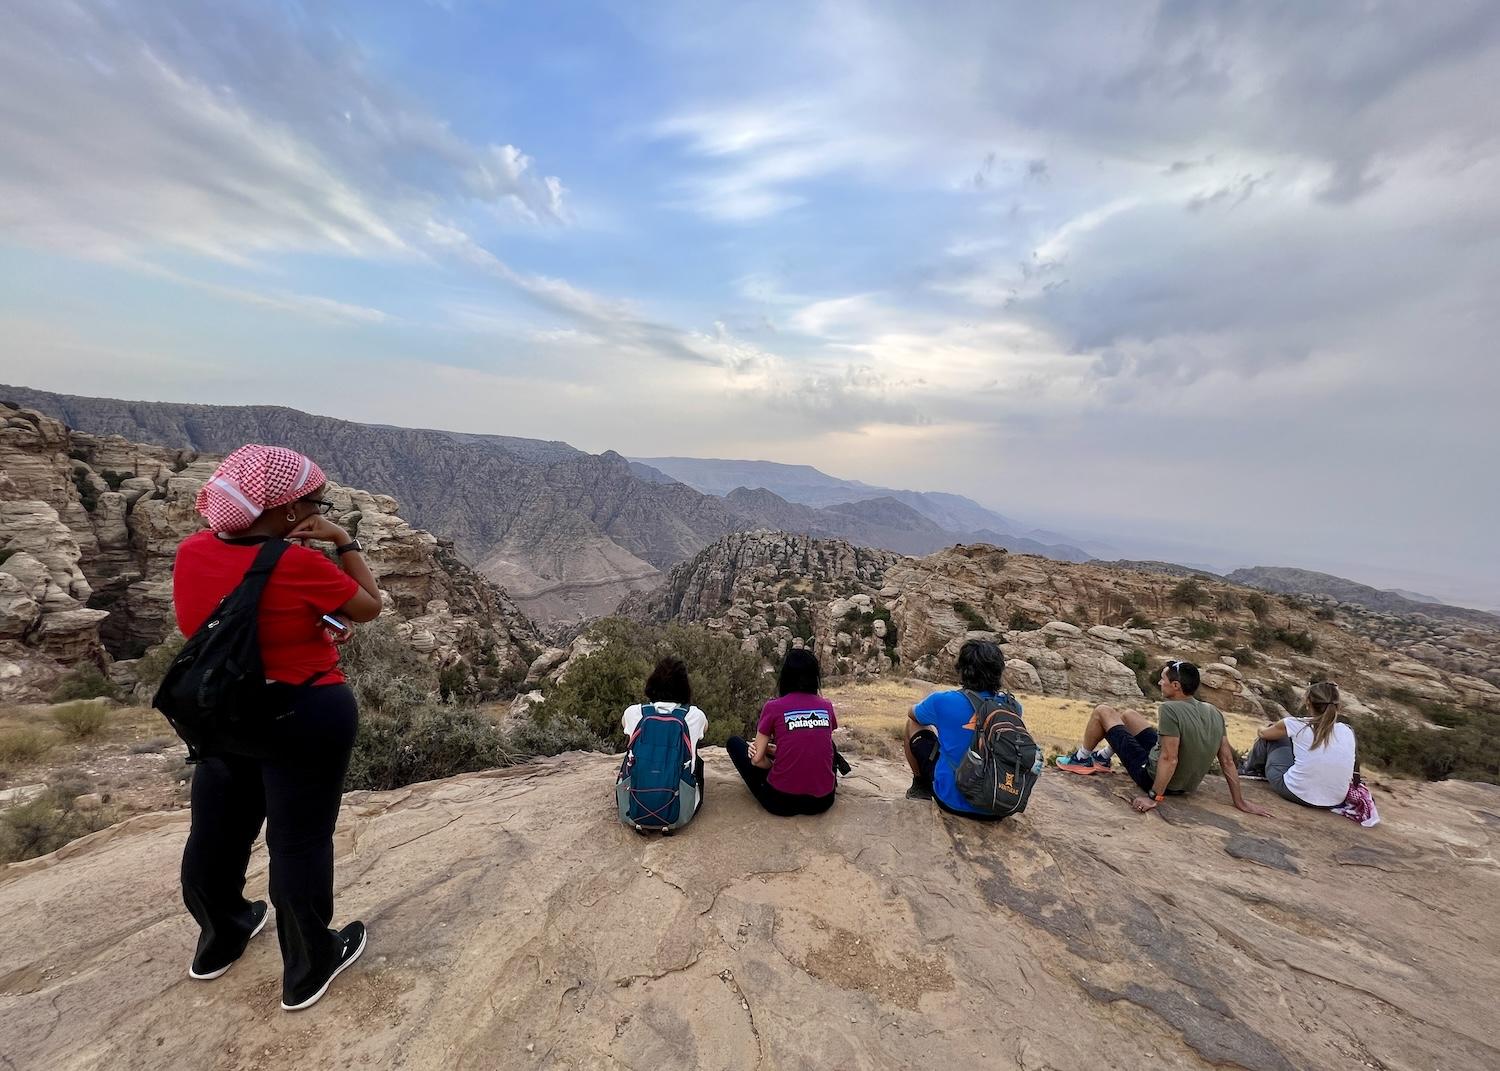 Along the Rummana Campsite Trail in Dana Biosphere Reserve, hikers pause to reflect on the Jordanian landscape.